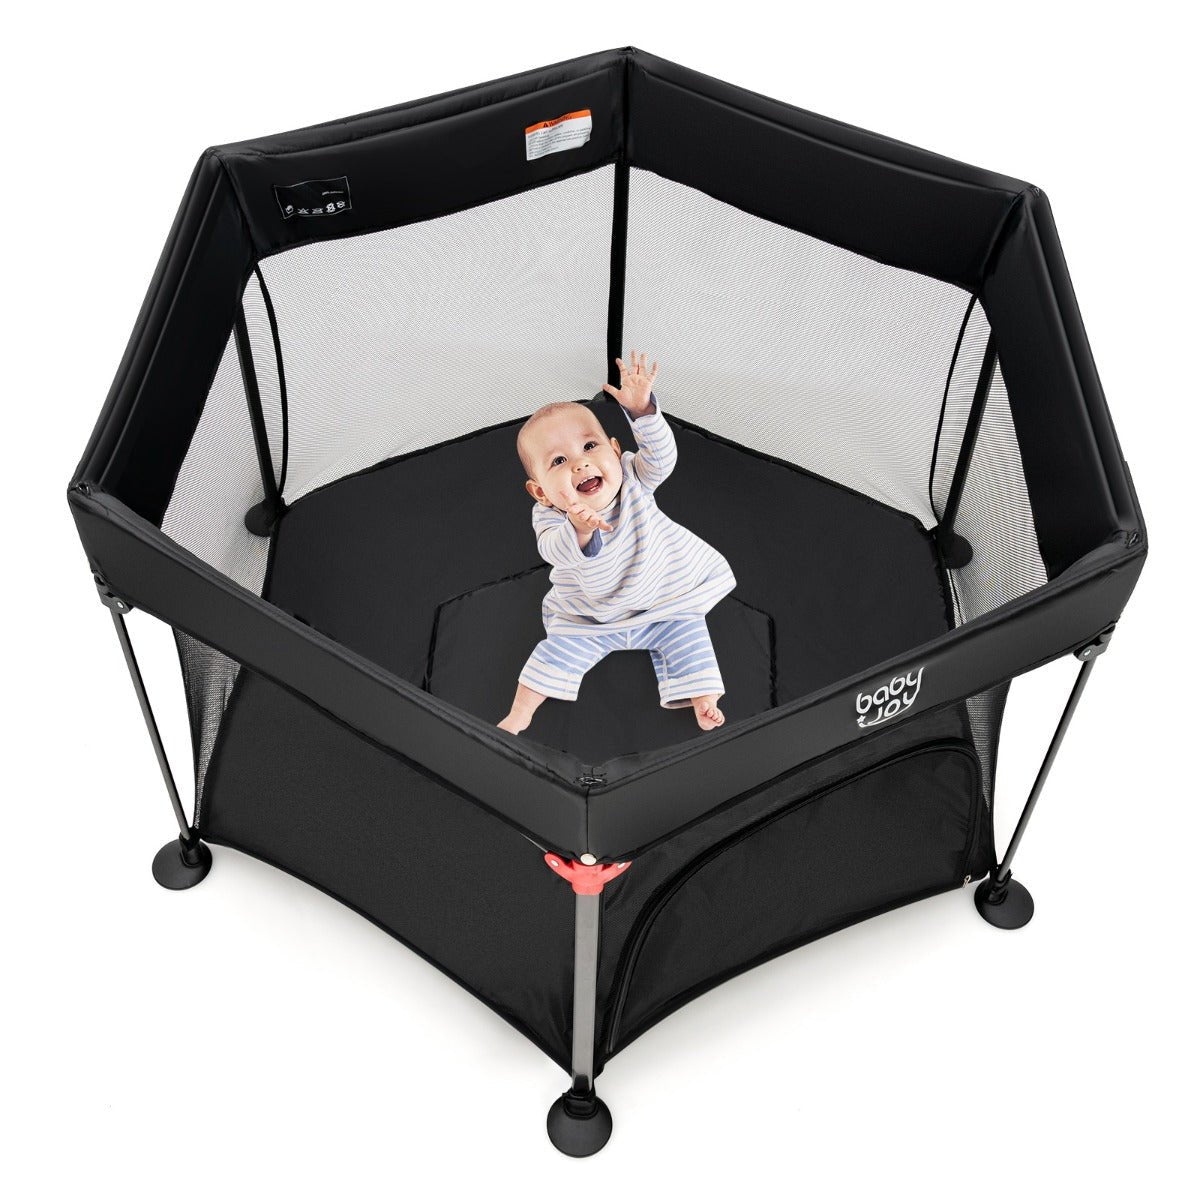 Portable Baby Playpen with Removable Canopy: Black for Indoor & Outdoor Joy